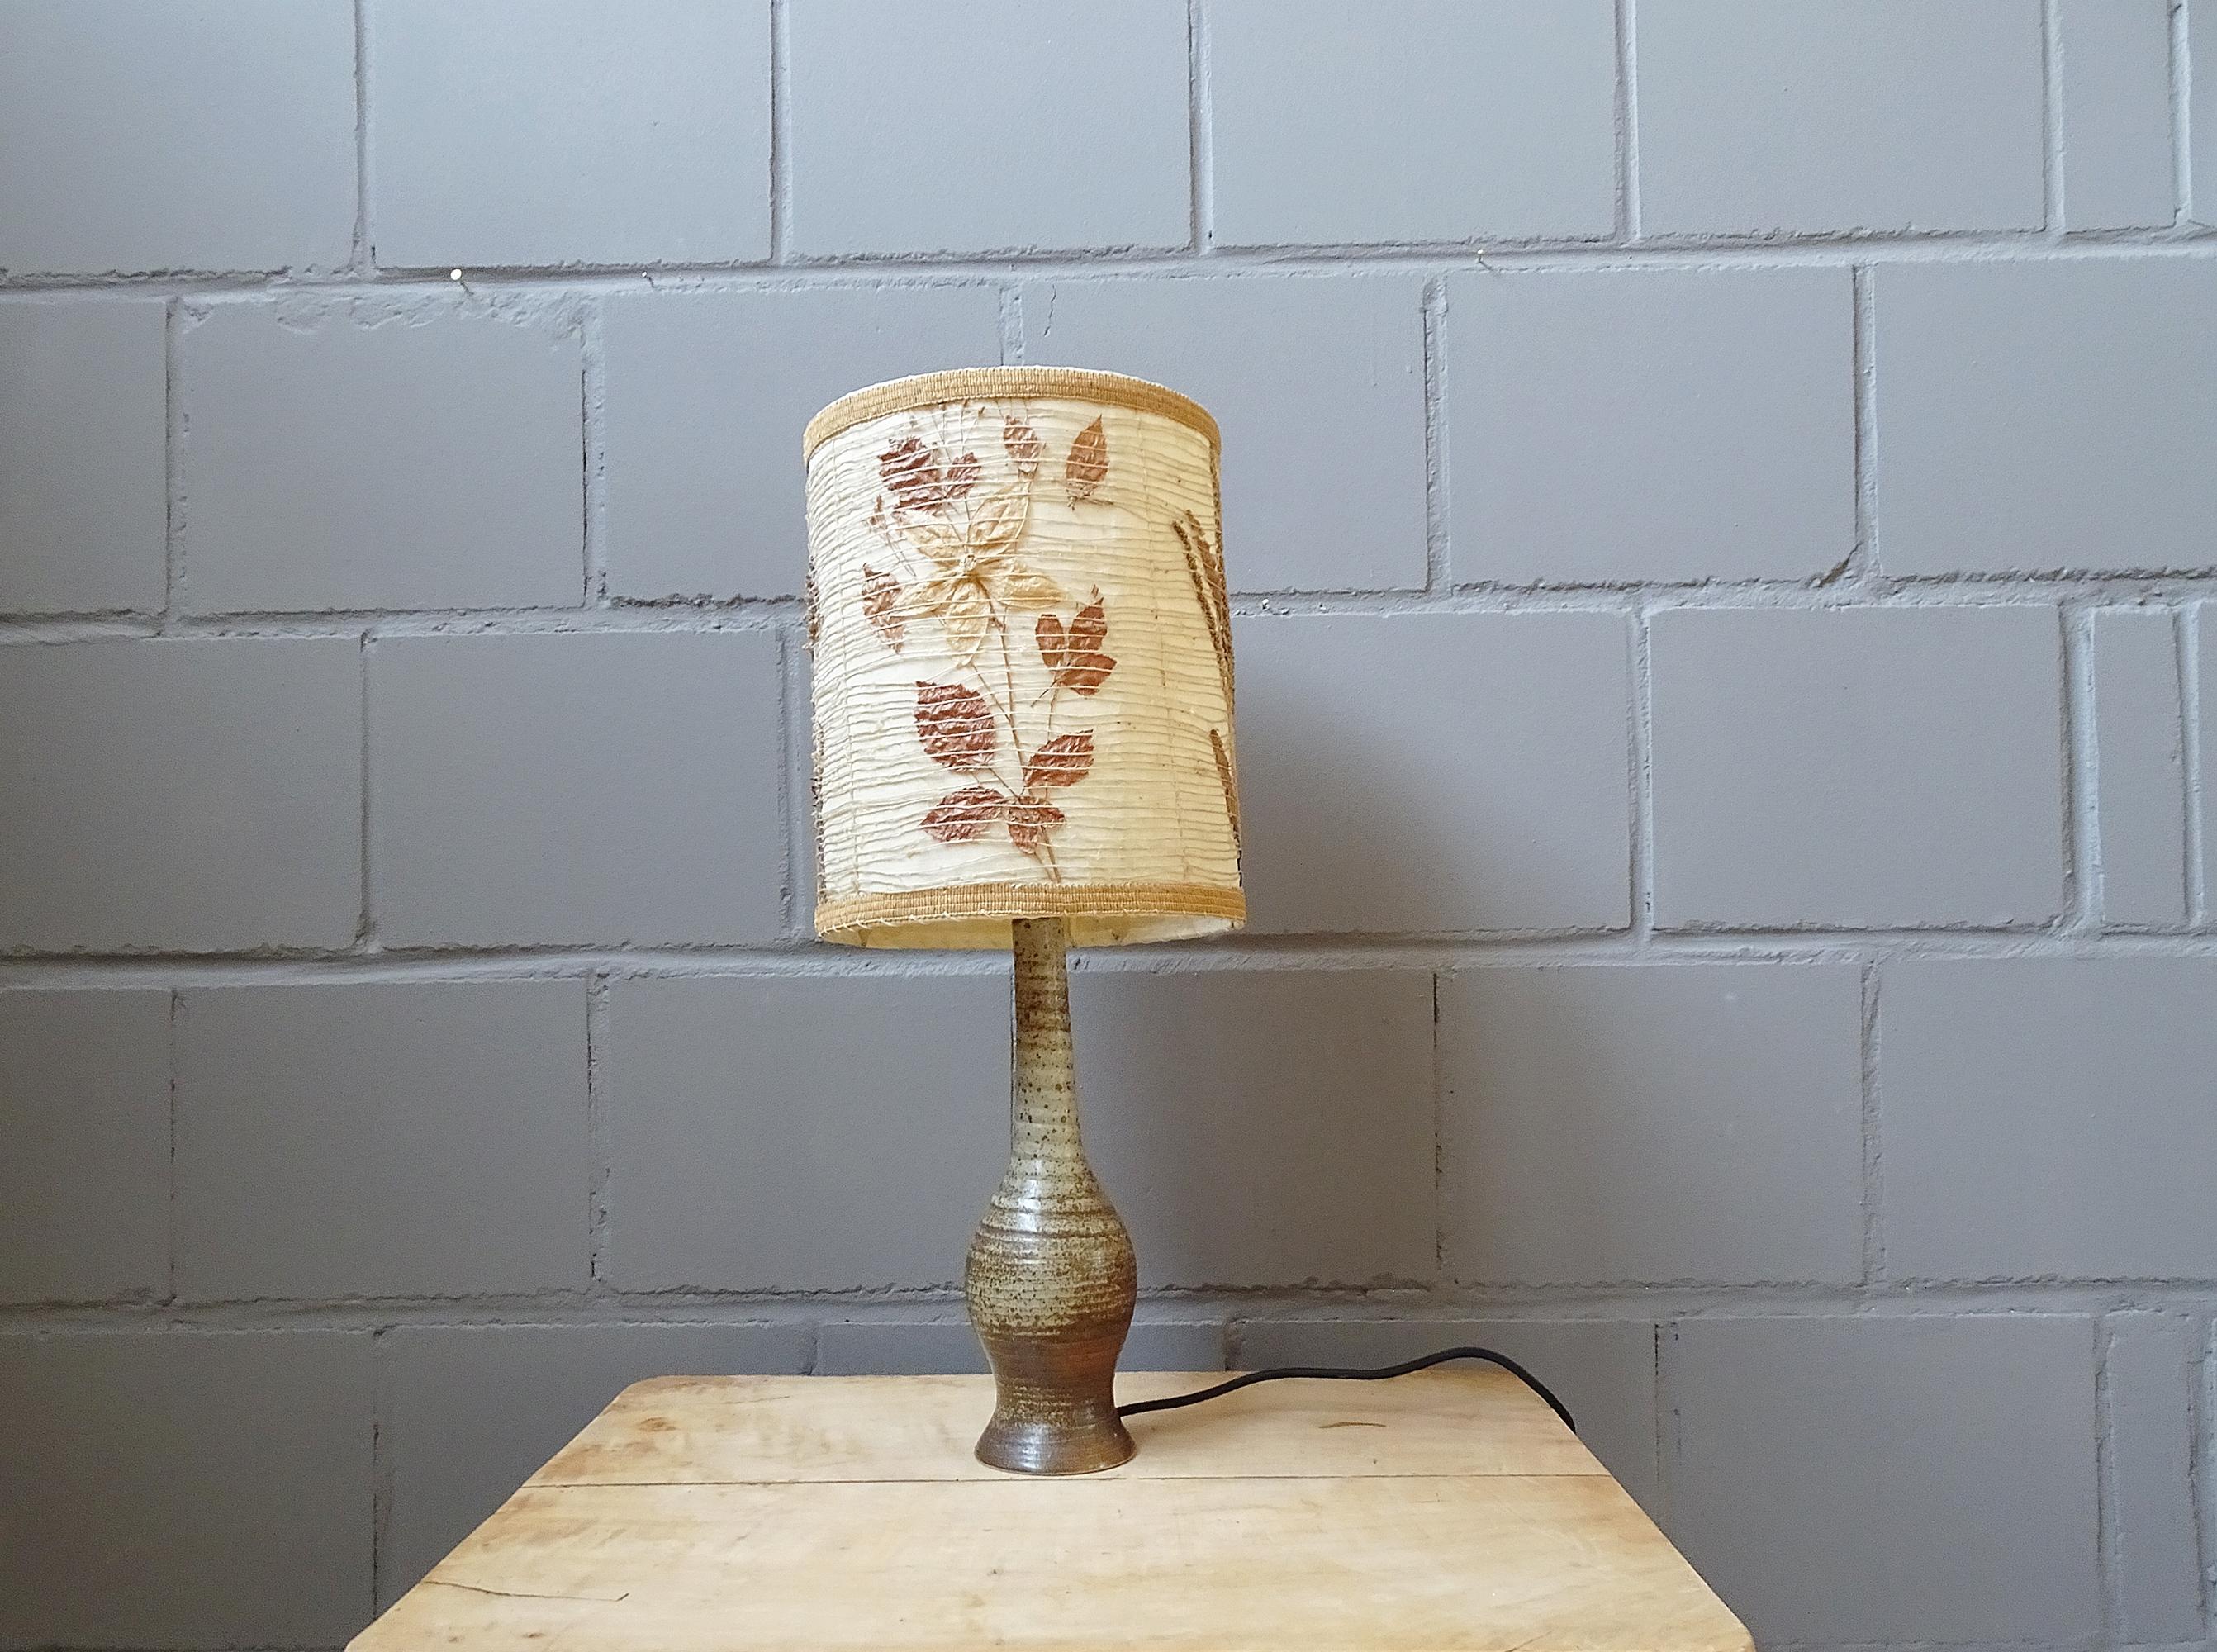 French table lamp from the 1960s-1970s by Jean Tessier Atelier du Cep. Sculptural base made of pyrite sandstone and a large lampshade with various leaves / dried flowers.

A timeless lamp that impresses with its natural materials and